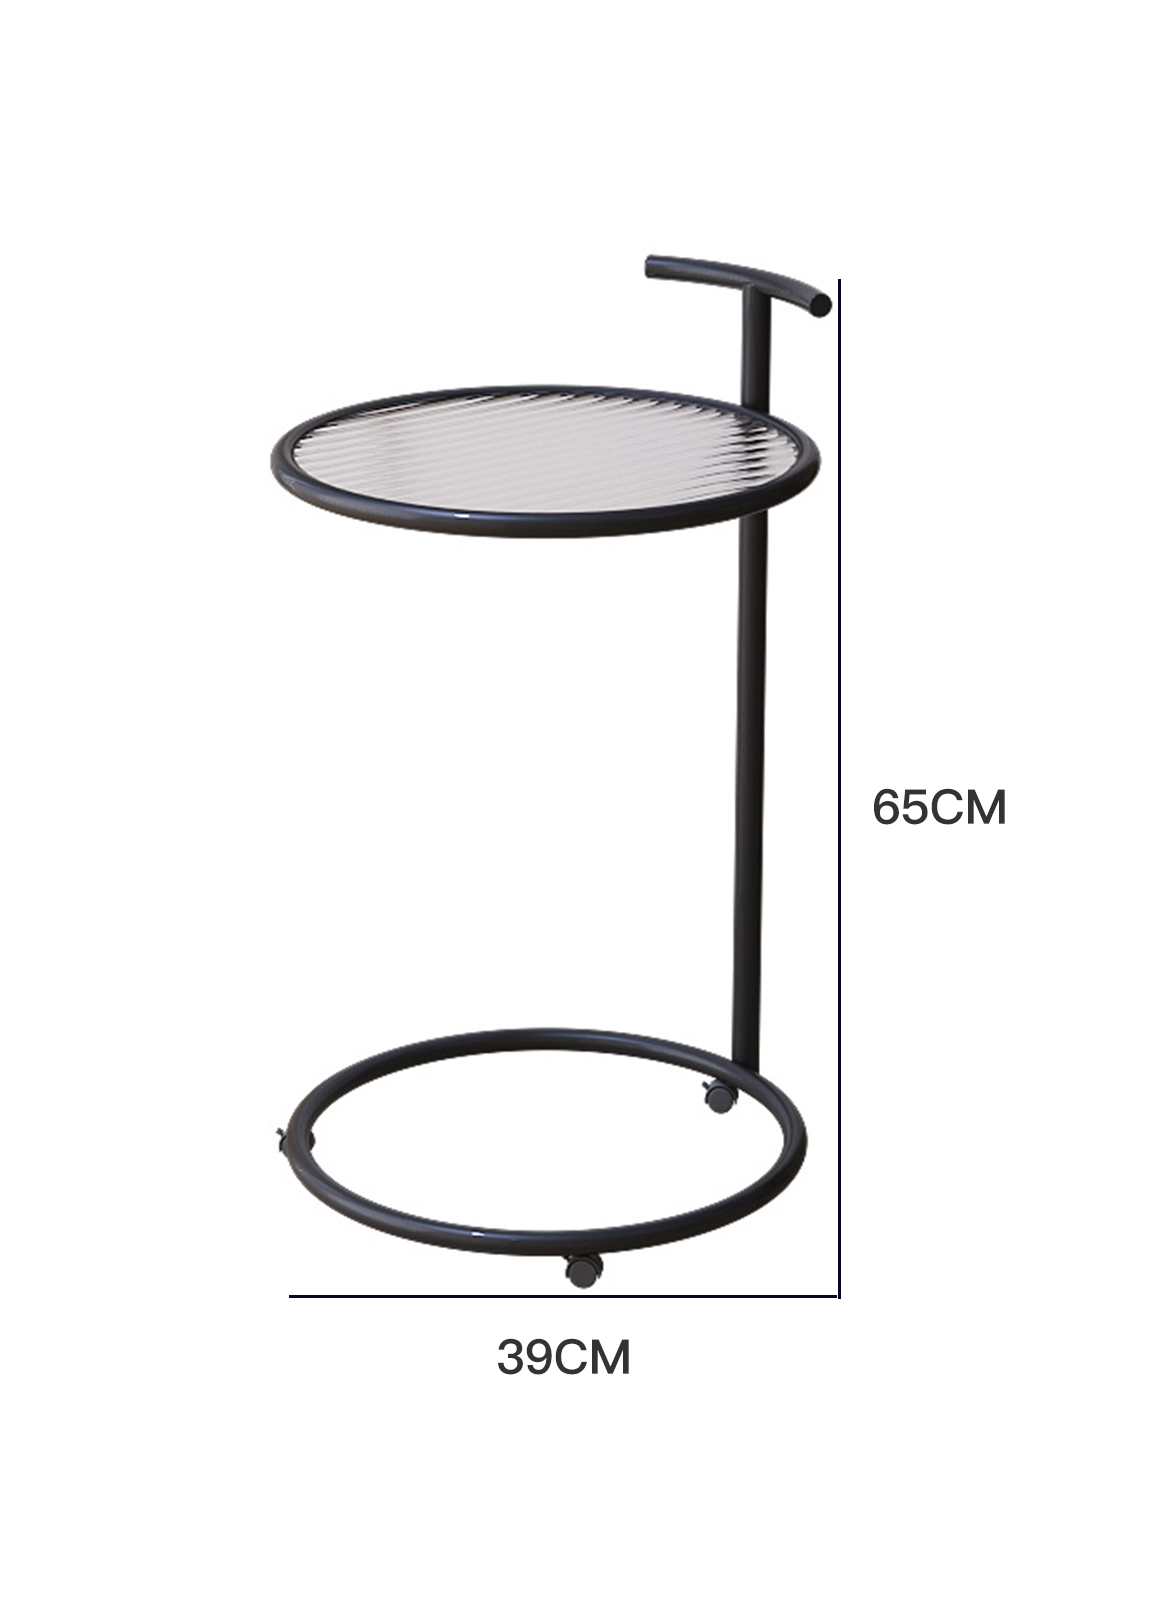 Round Side Table, Transparent Glass End Table with Metal Frame, Modern Coffee Table for Living Room